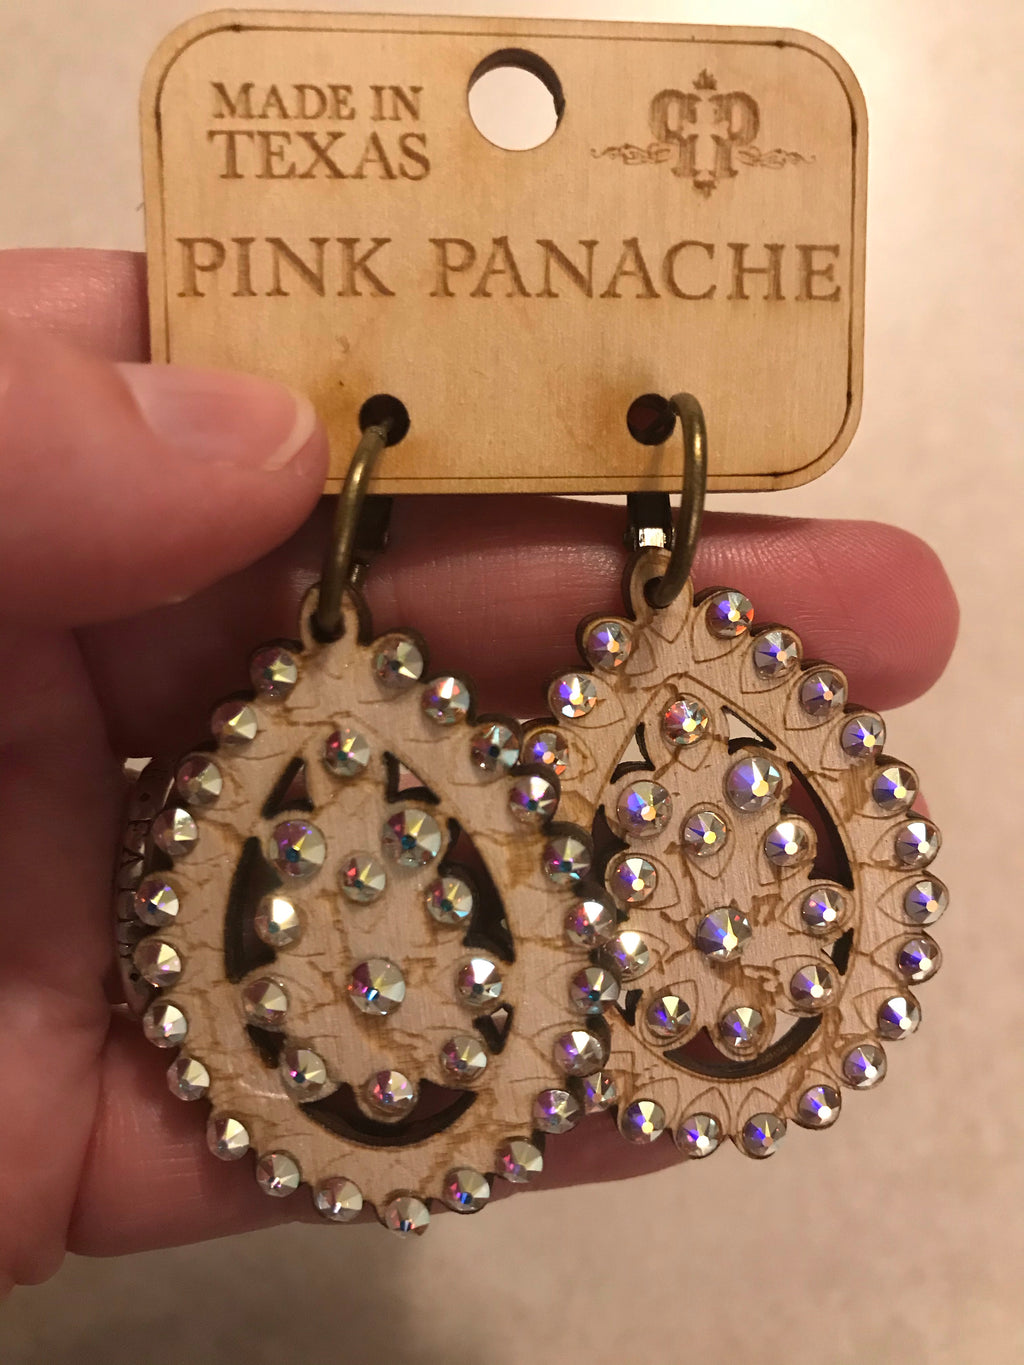 Small Santa Fe Pearl White with Crystals Pink Panache Earrings